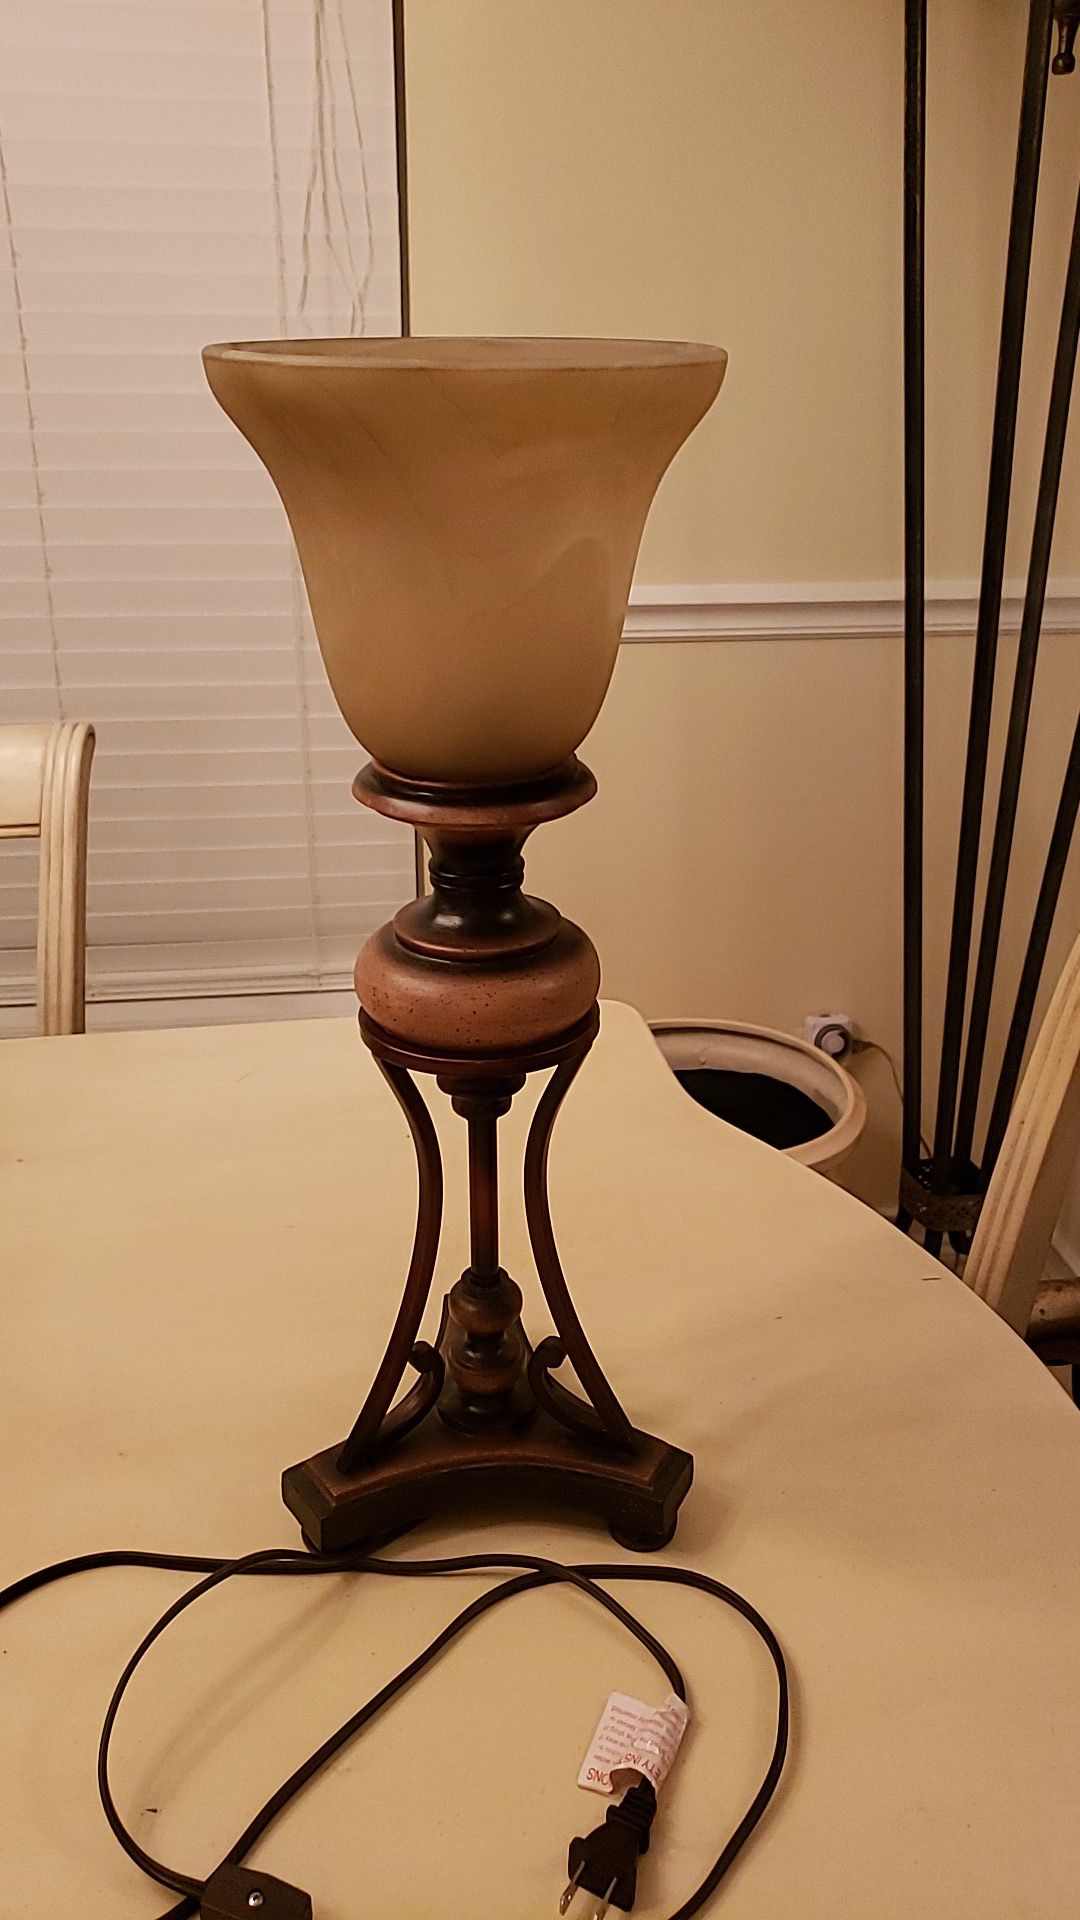 Antique brown table lamp